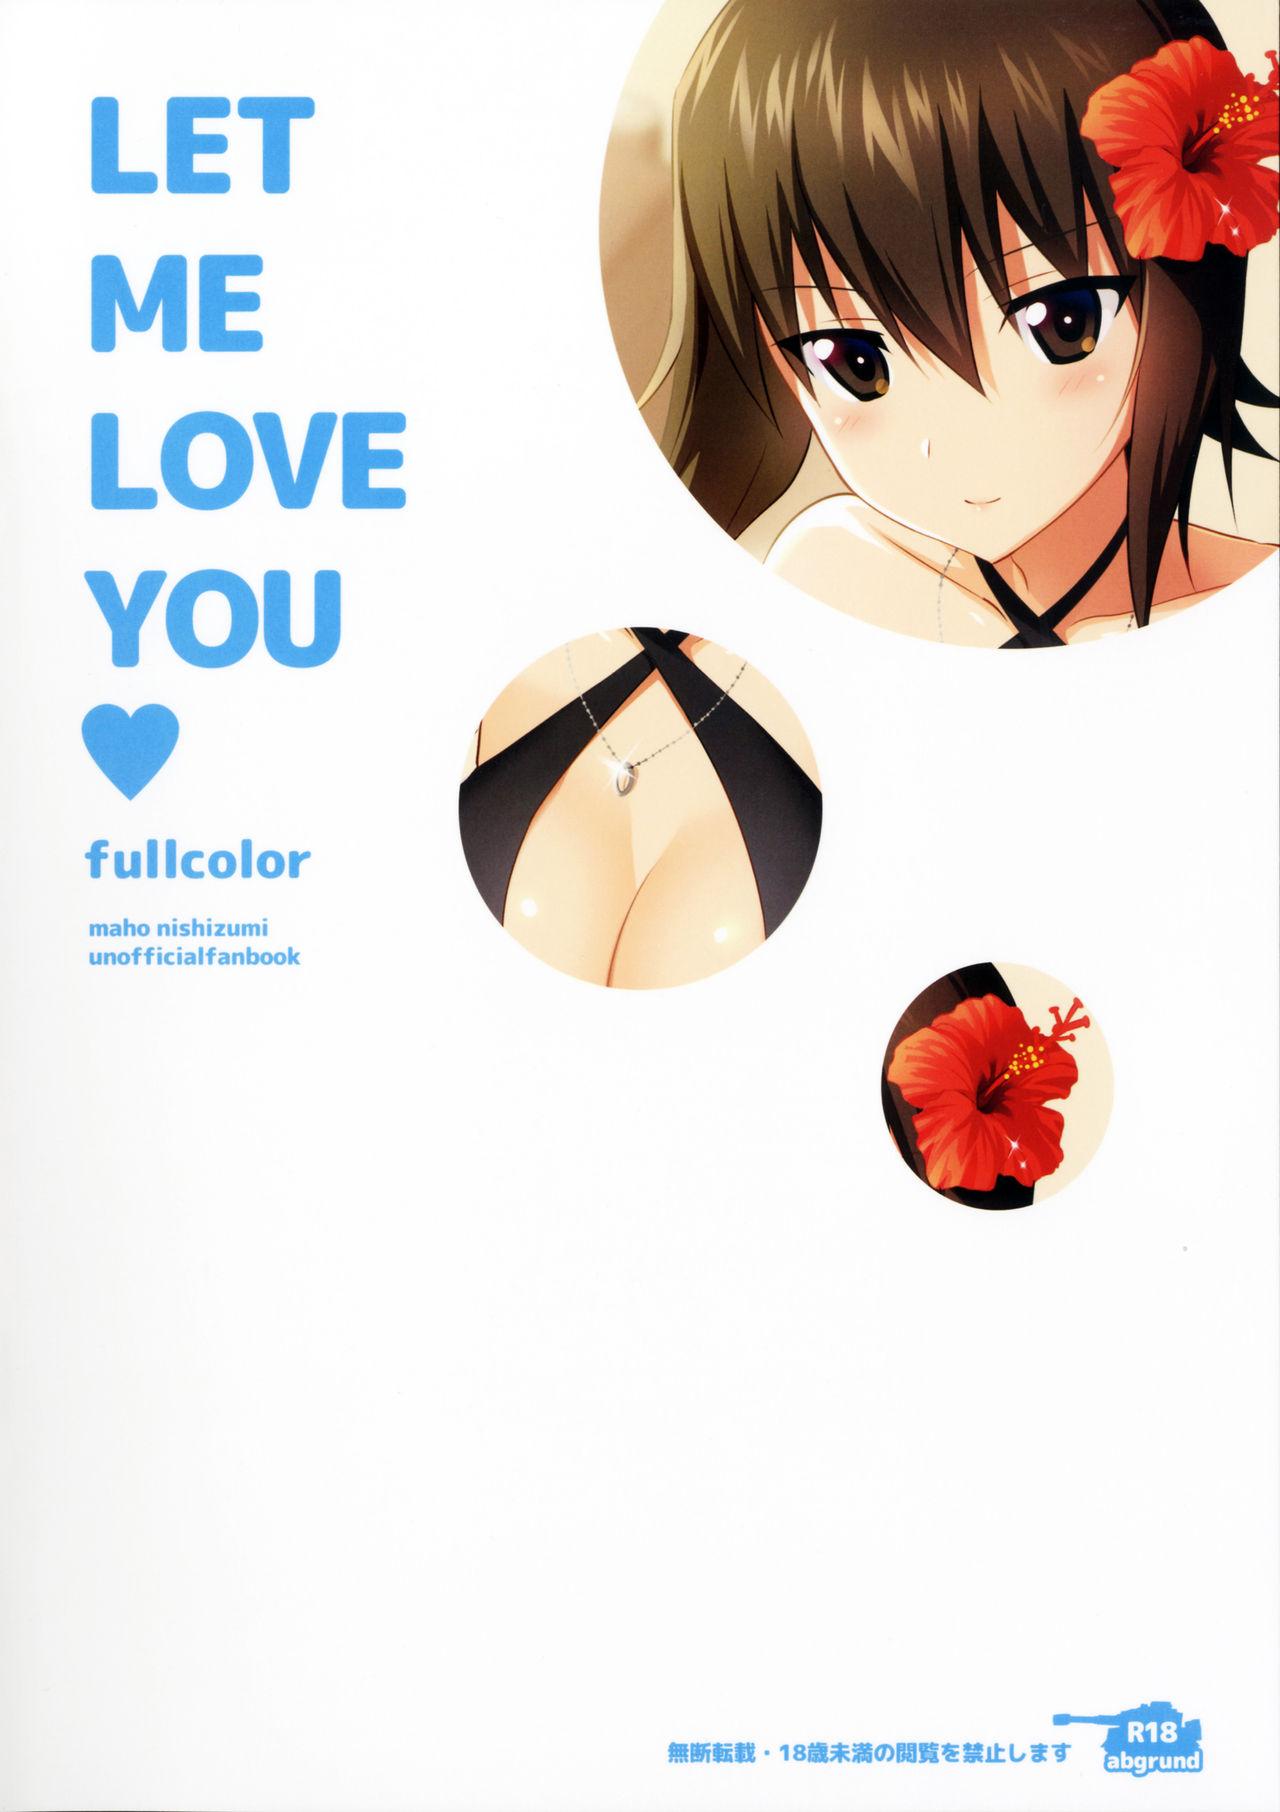 Socks LET ME LOVE YOU fullcolor - Girls und panzer Perfect Body Porn - Page 19